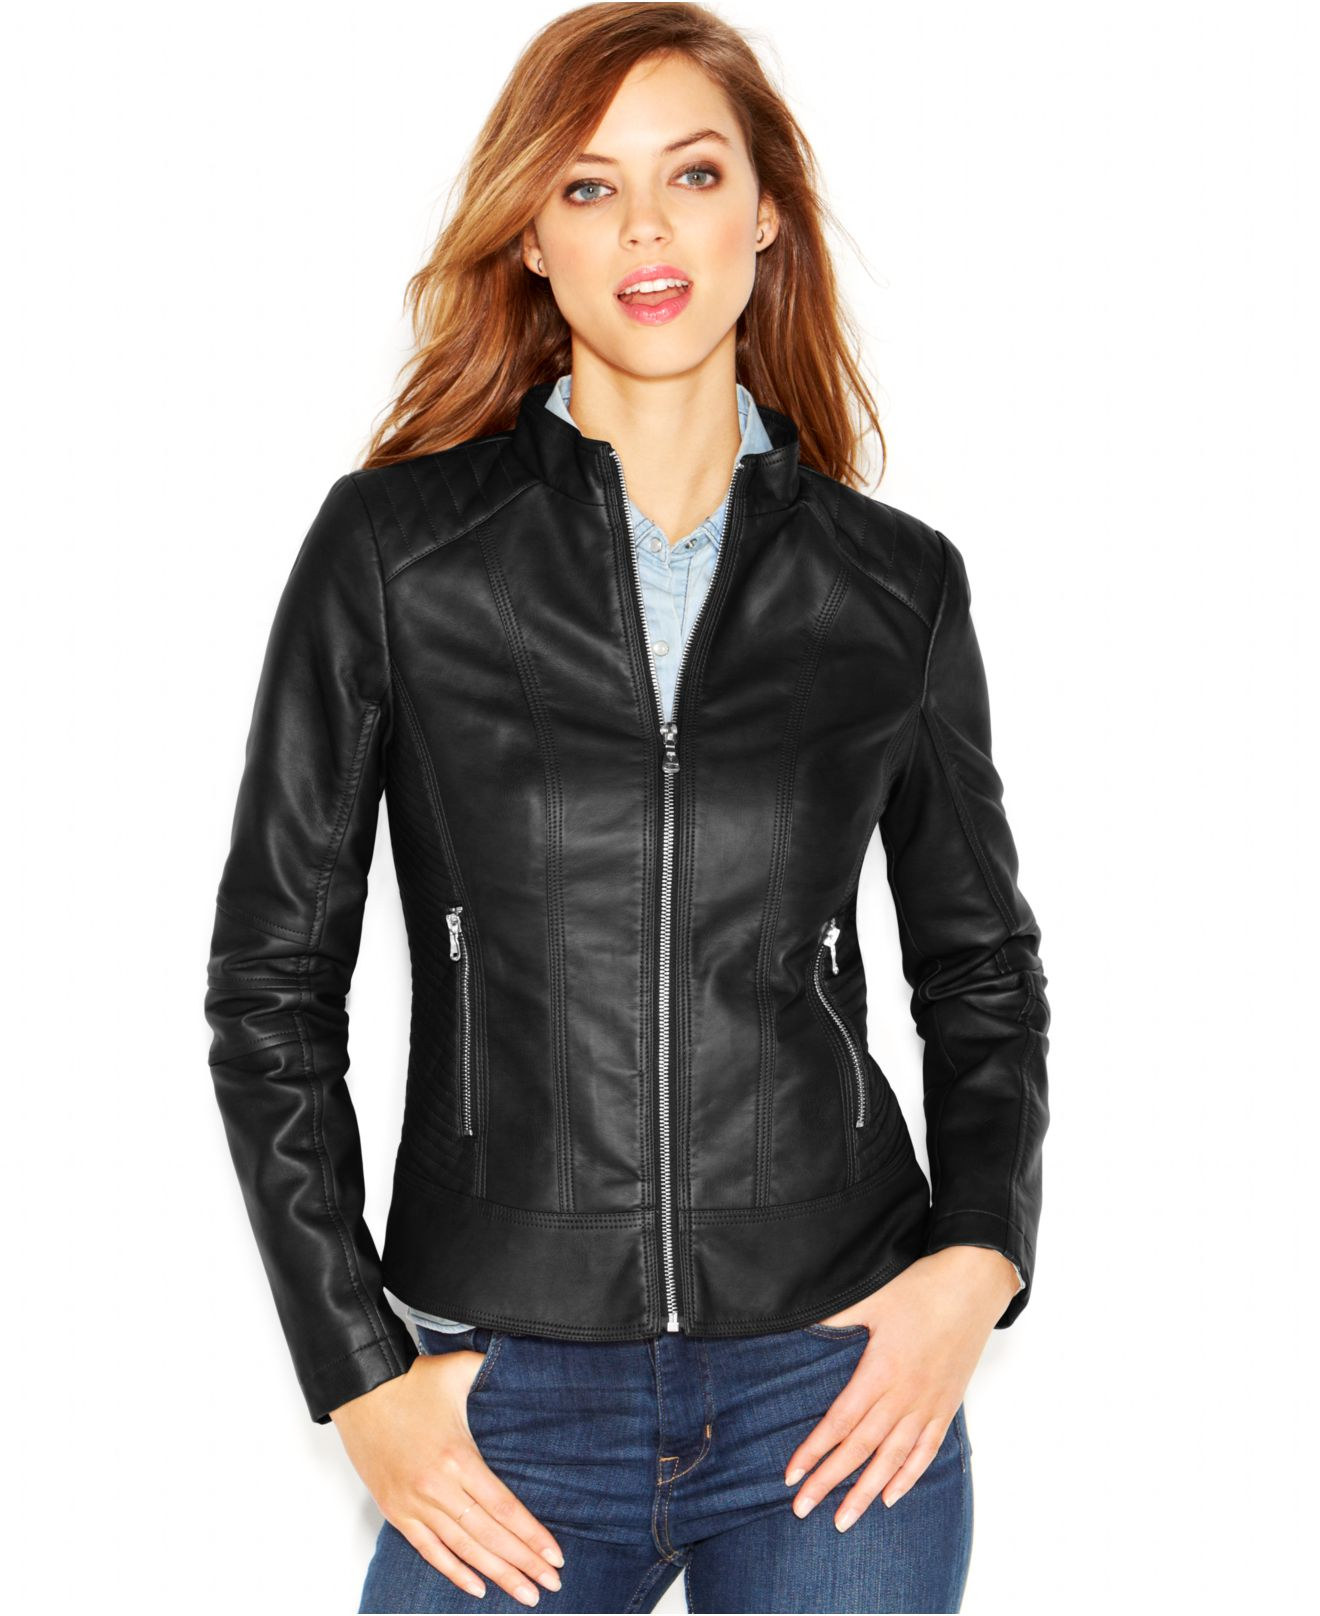 guess women's black leather jacket